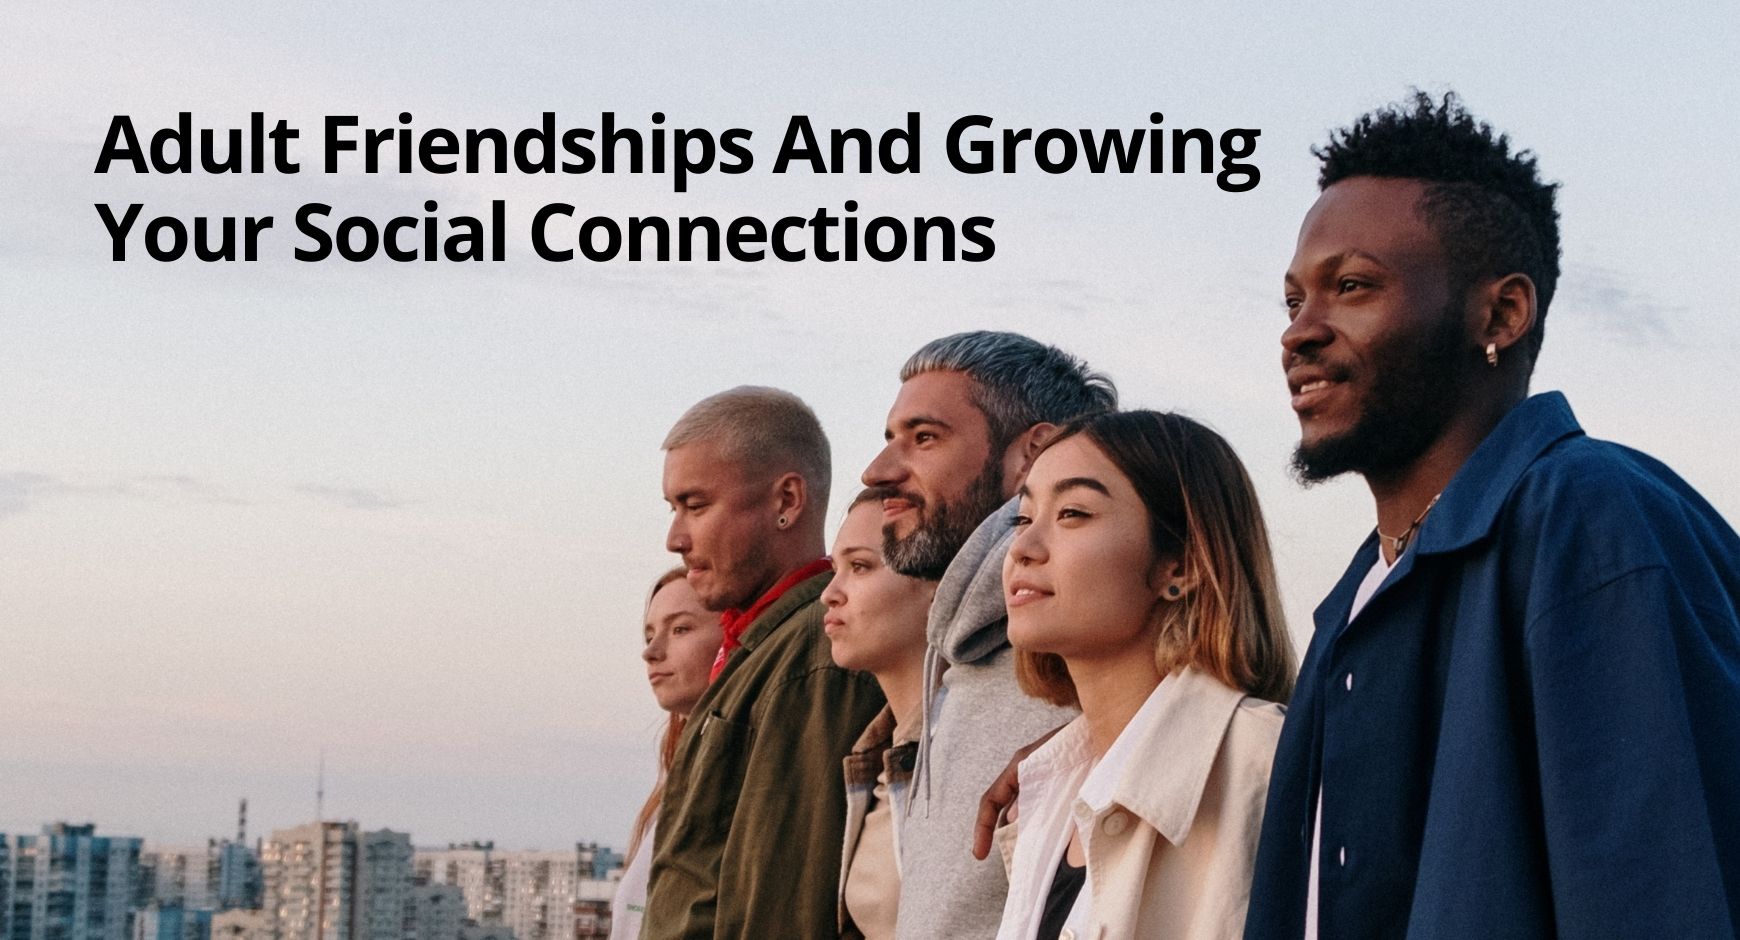 A group of three men and three women happy and looking out in the distance next to words that read "Adult Friendships And Growing Your Social Connections"